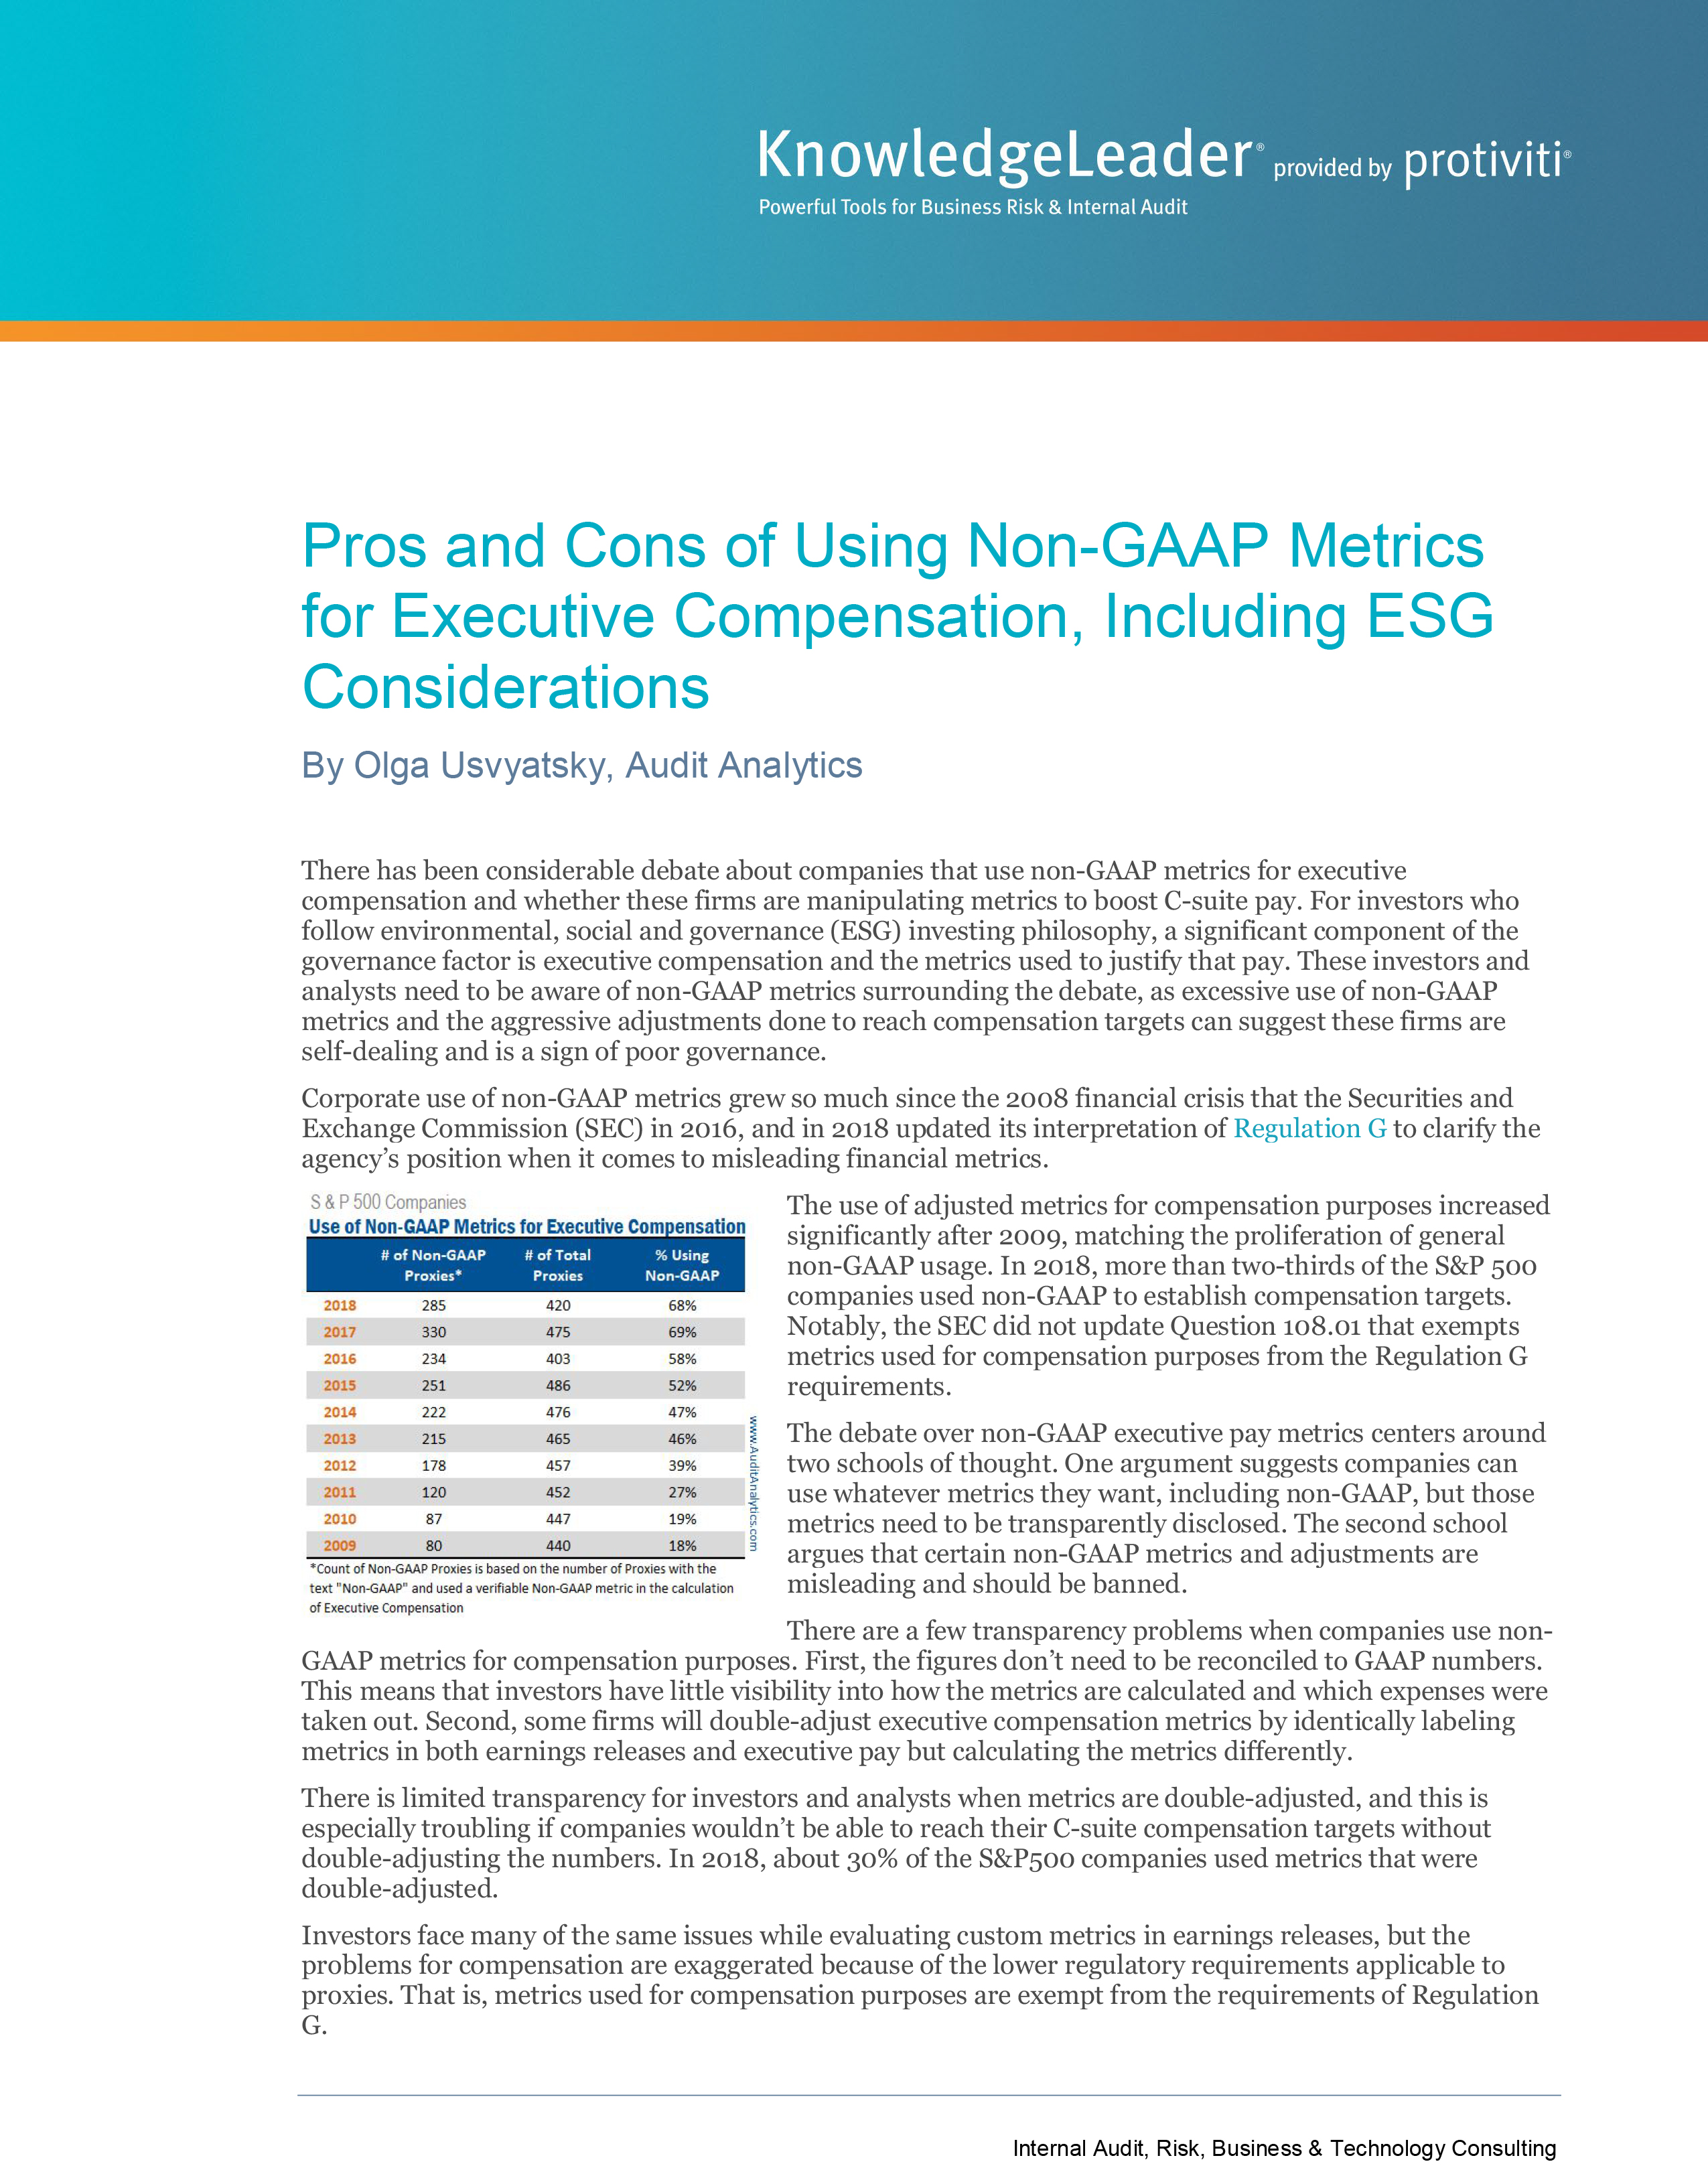 Screenshot of the first page of Pros and Cons of Using Non-GAAP Metrics for Executive Compensation, Including ESG Considerations